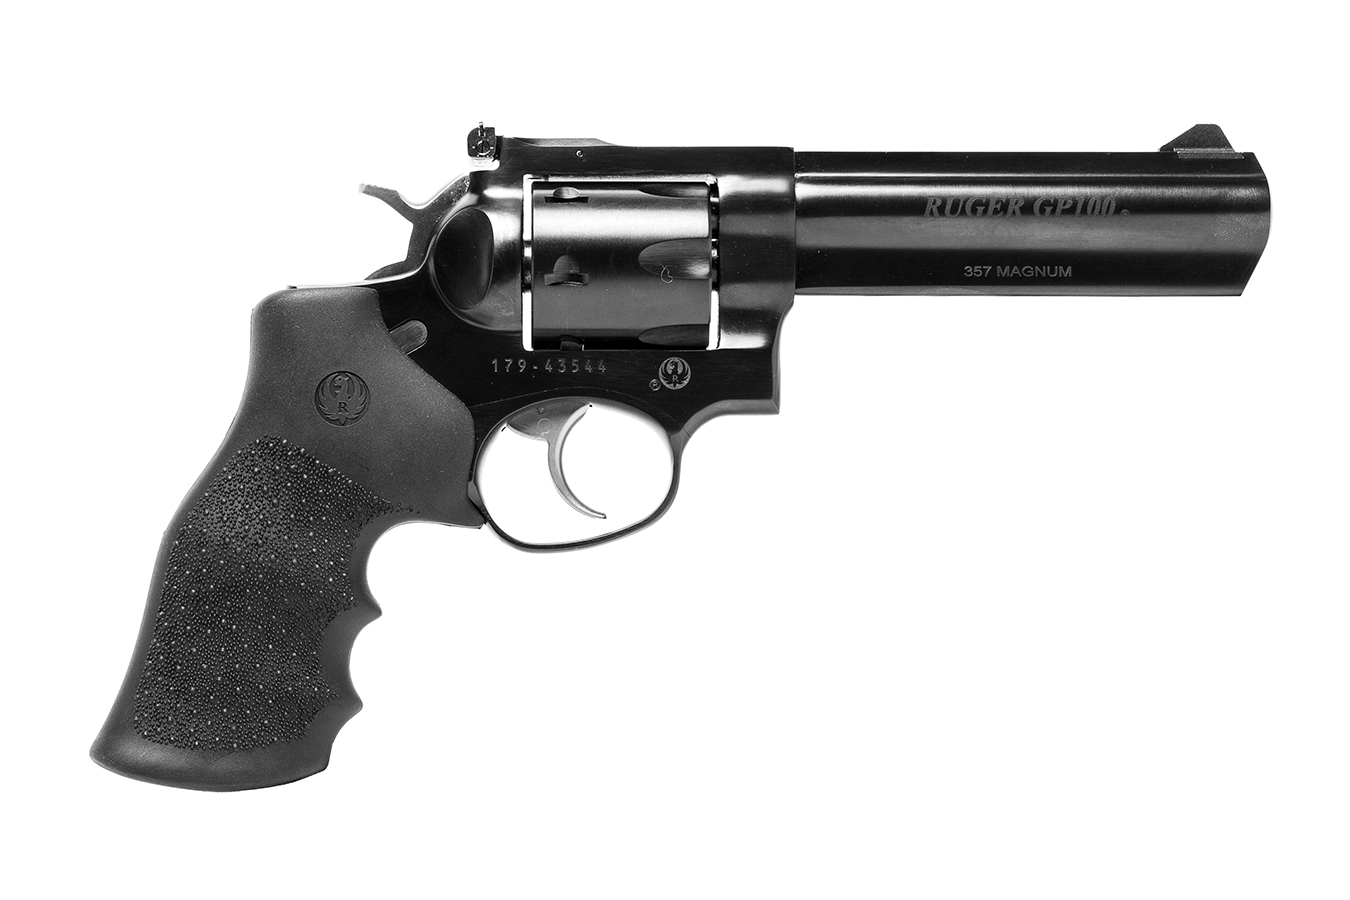 RUGER GP100 .357 MAGNUM DOUBLE ACTION REVOLVER WITH 5 INCH BARREL